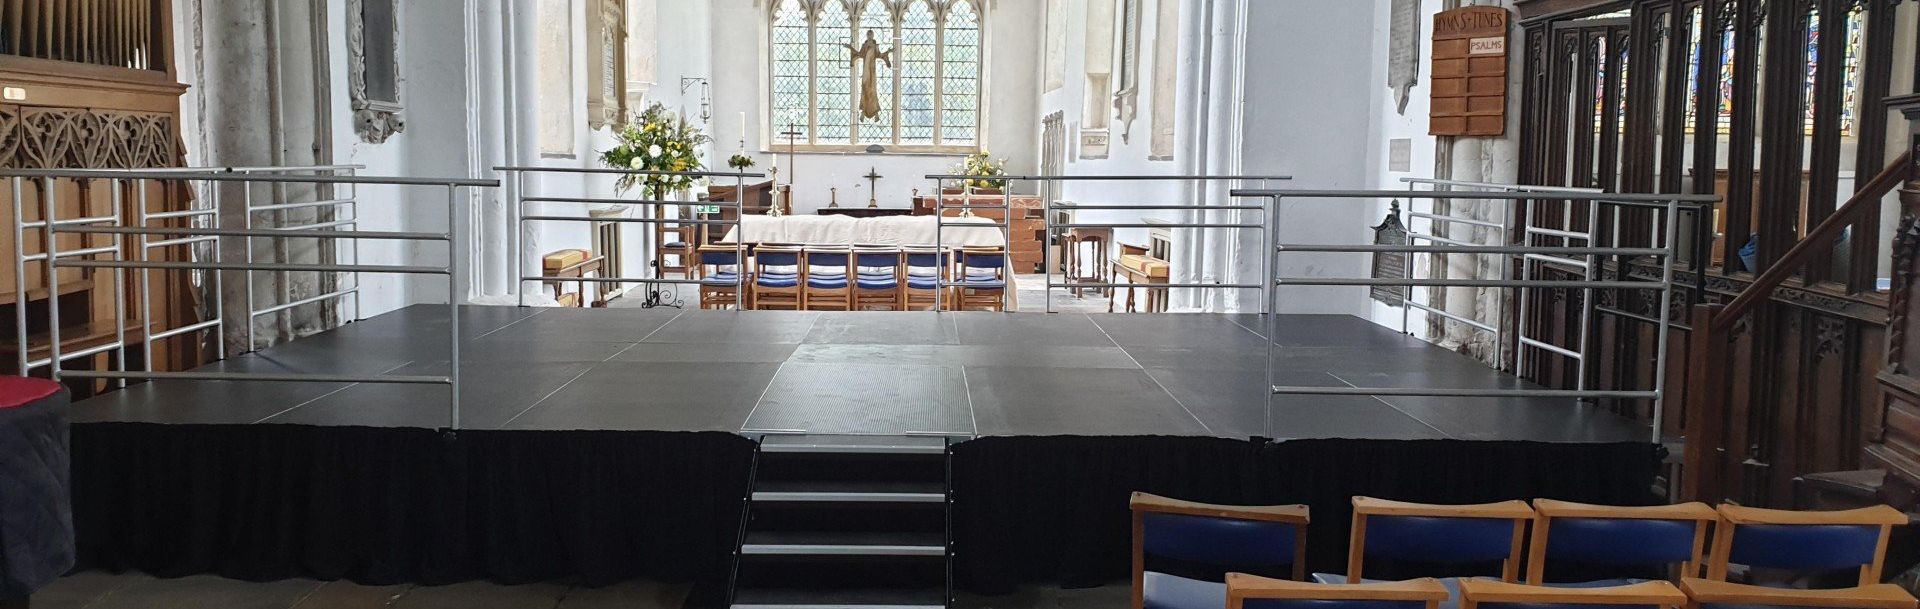 A modular stage set up in a church for an event with steps and handrails